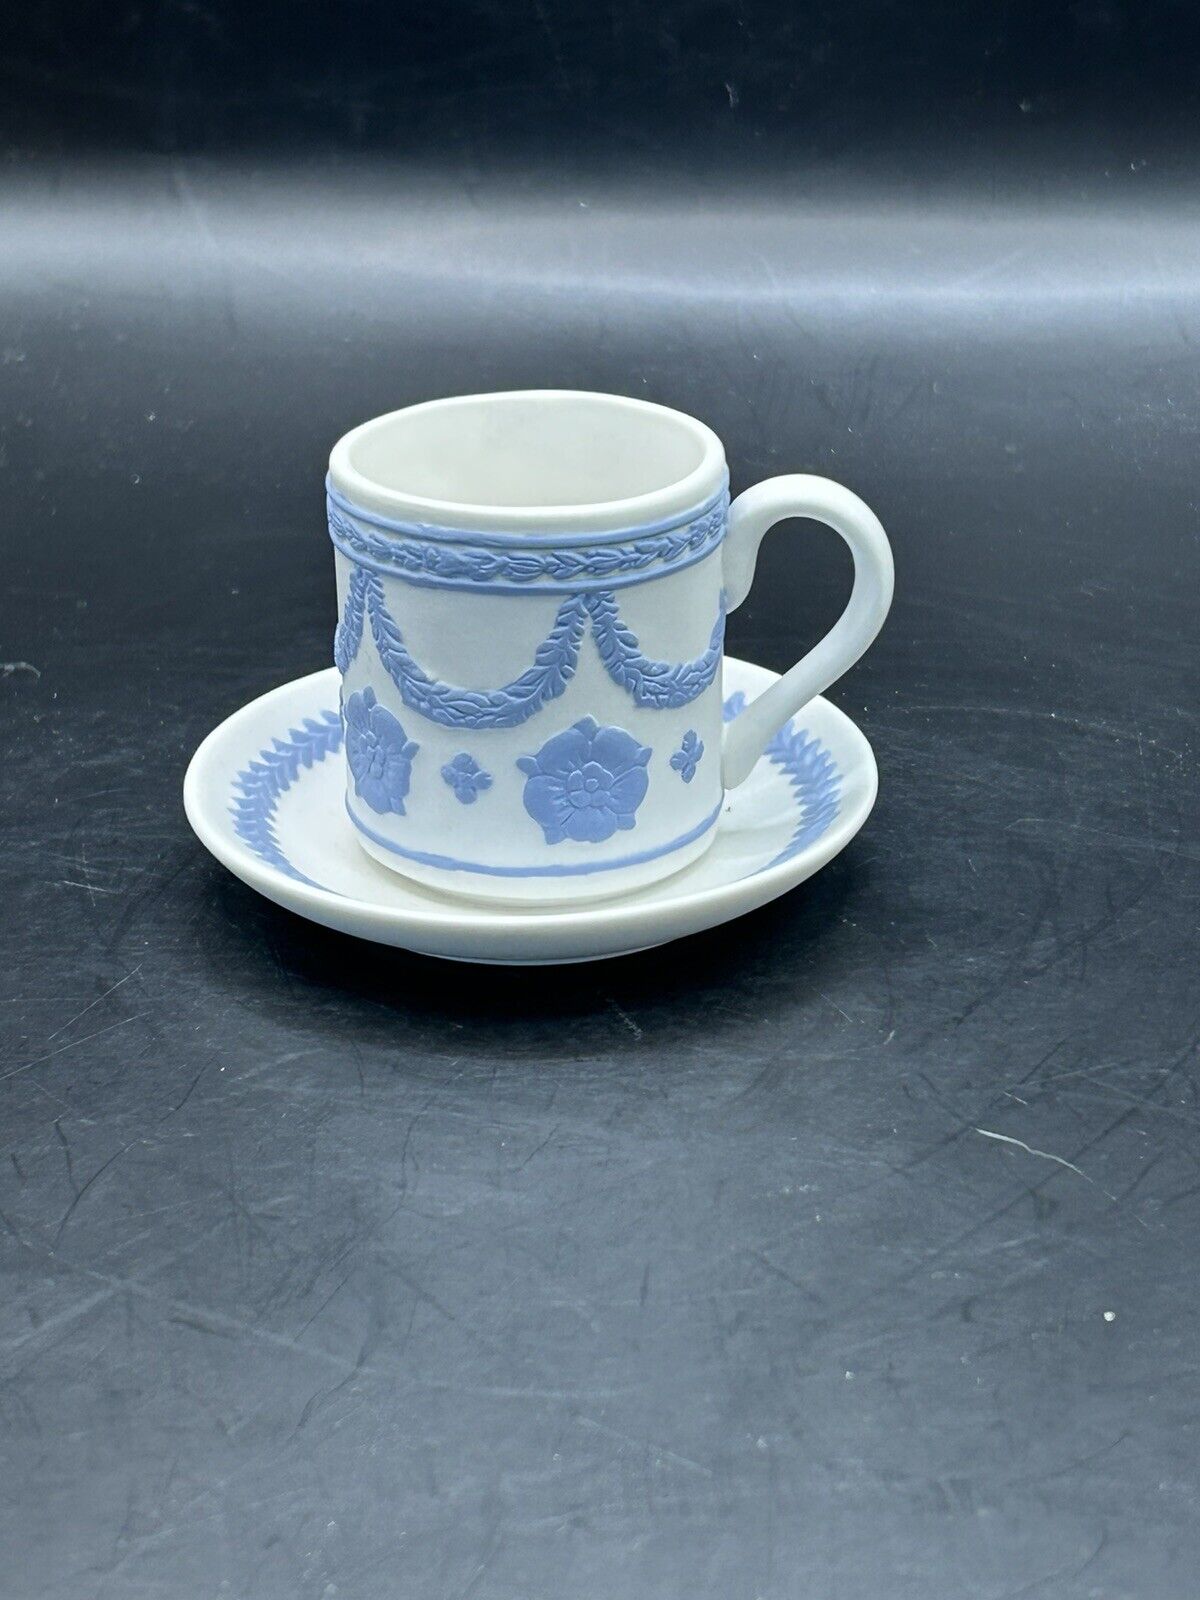 Wedgwood Ornament Iconic Teacup & Saucer White with Blue